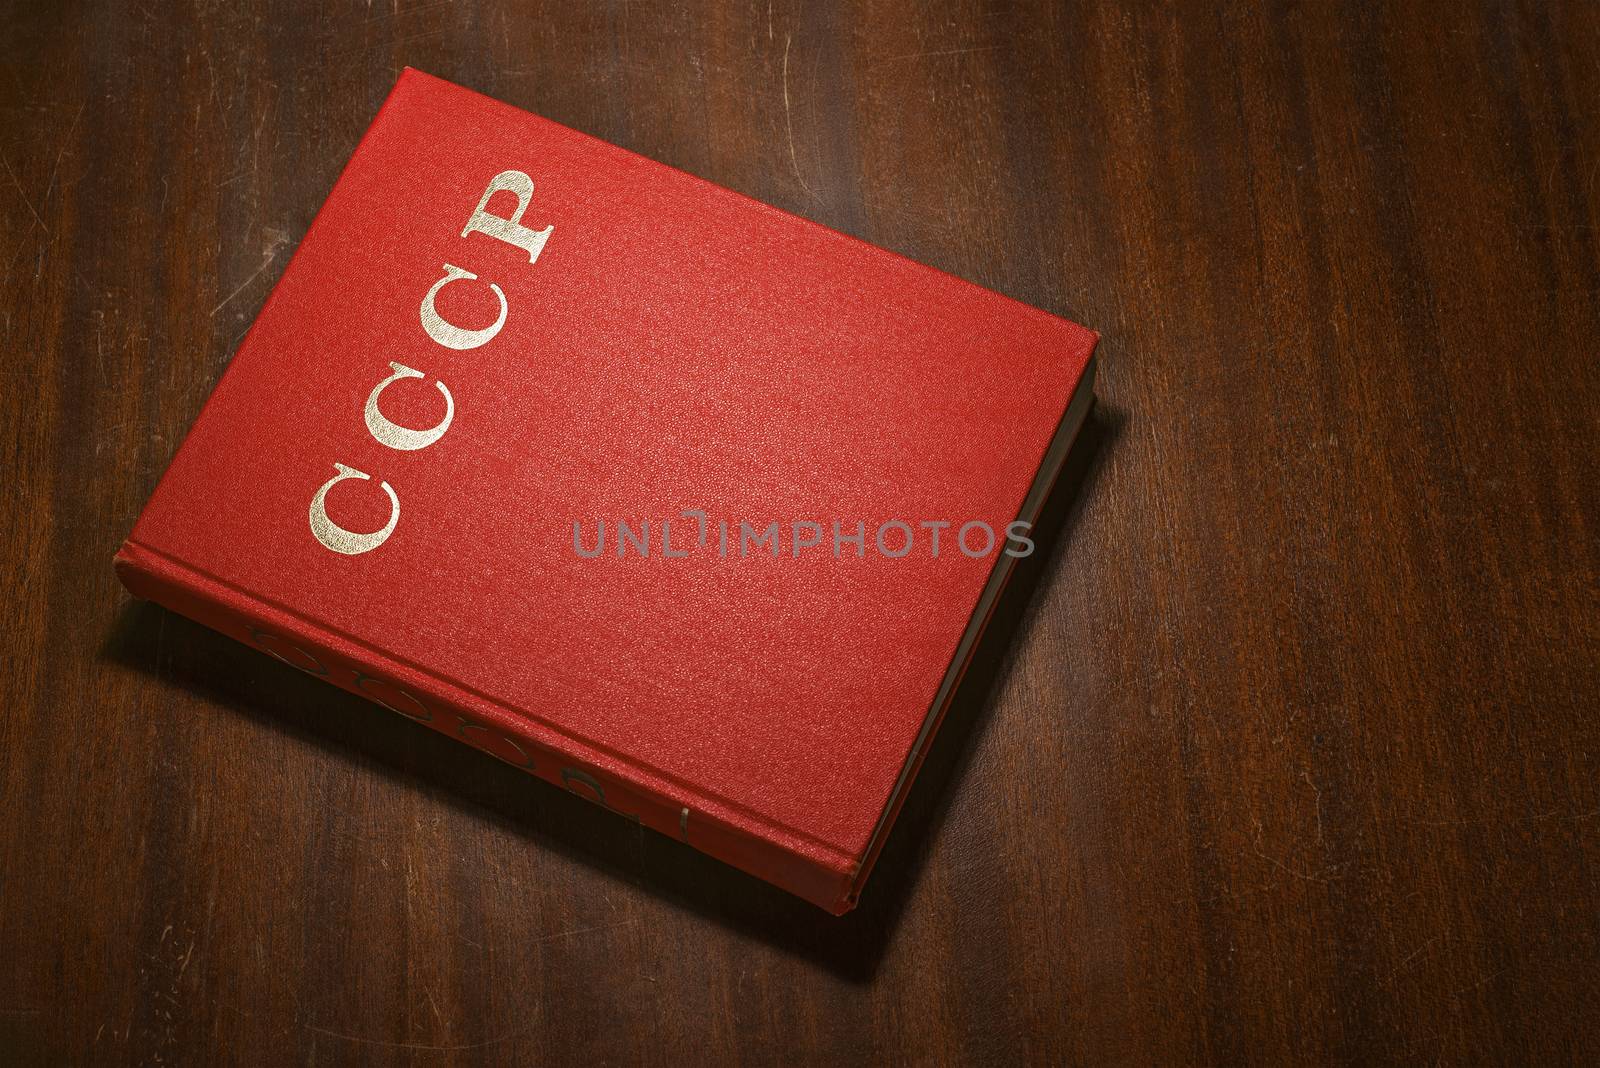 VILNIUS, LITHUANIA - NOVEMBER 24, 2015:  Red book on the wooden scratched table,  CCCP  written on the cover, Illustrative Editorial Image